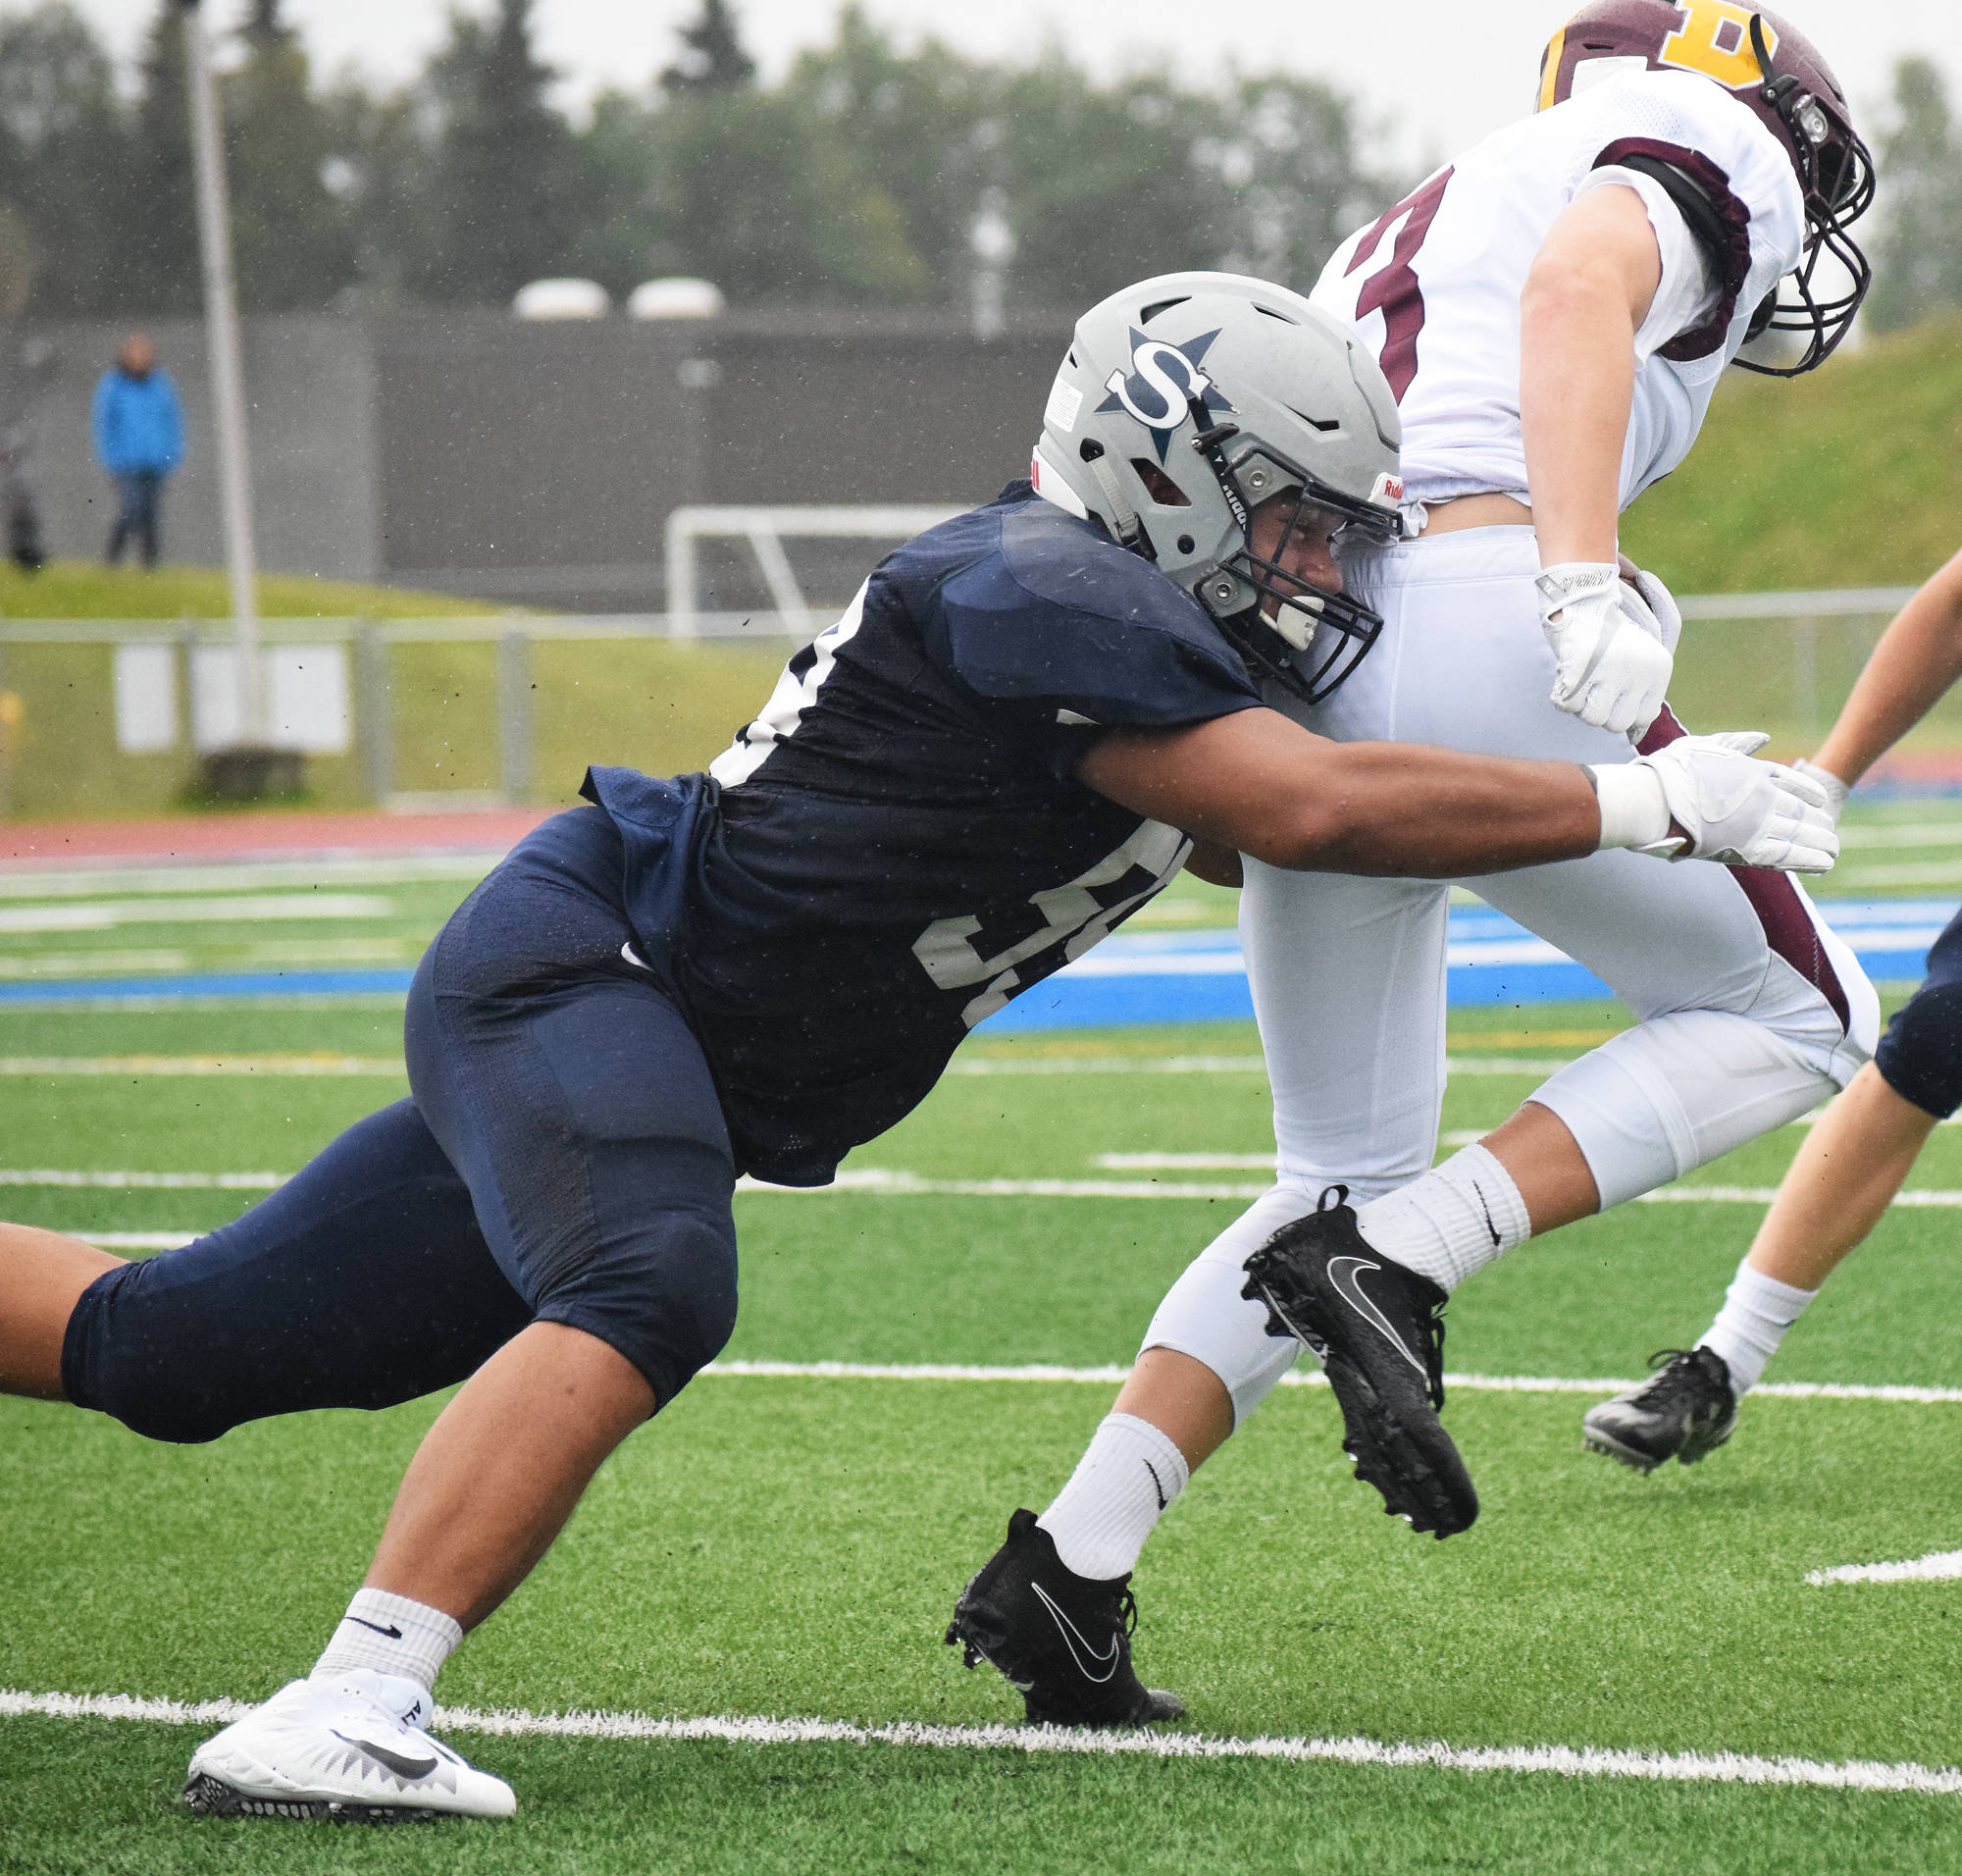 Soldotna lineman Wendell Tuisuala wraps up Dimond running back Ryan Beach, Aug. 18 at Justin Maile Field in Soldotna. (Photo by Joey Klecka/Peninsula Clarion)